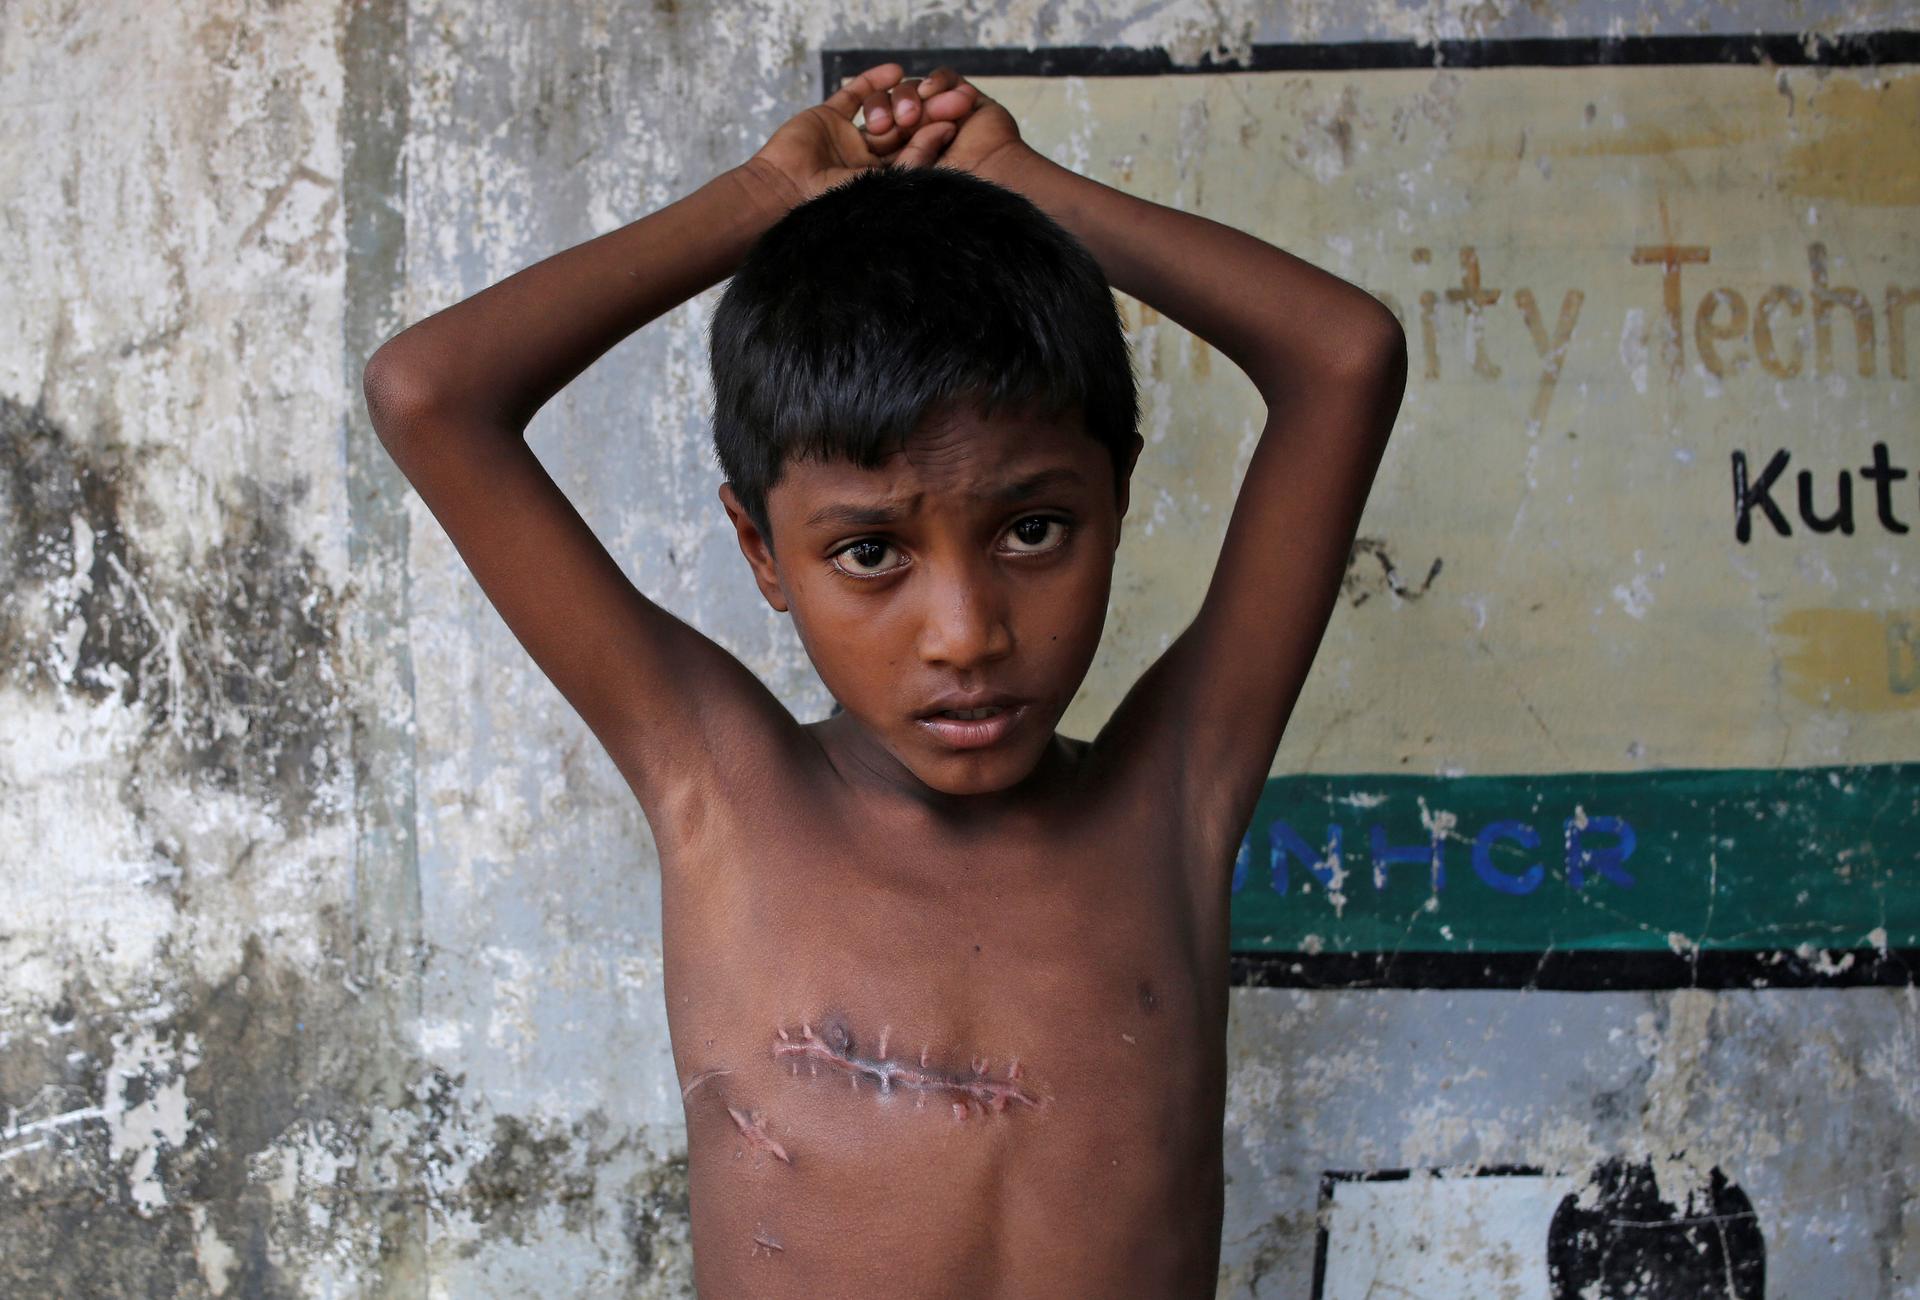 Mohammed Shoaib, 7, who was shot on his chest before crossing the border from Myanmar in August, shows his injury 